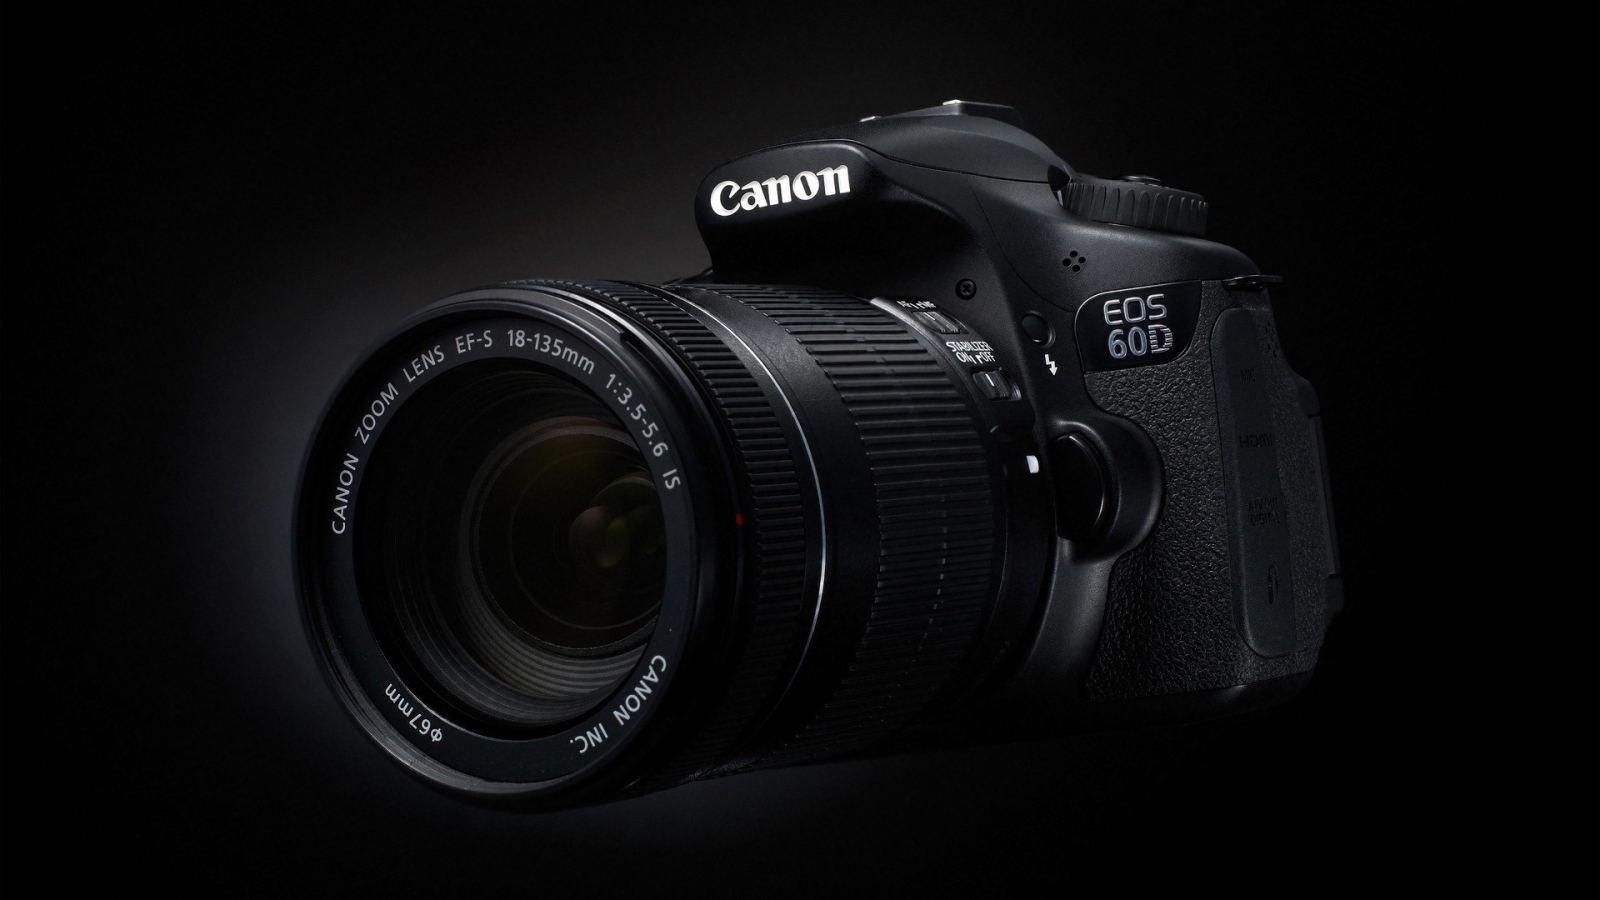 Canon EOS 60D for 1600 x 900 HDTV resolution